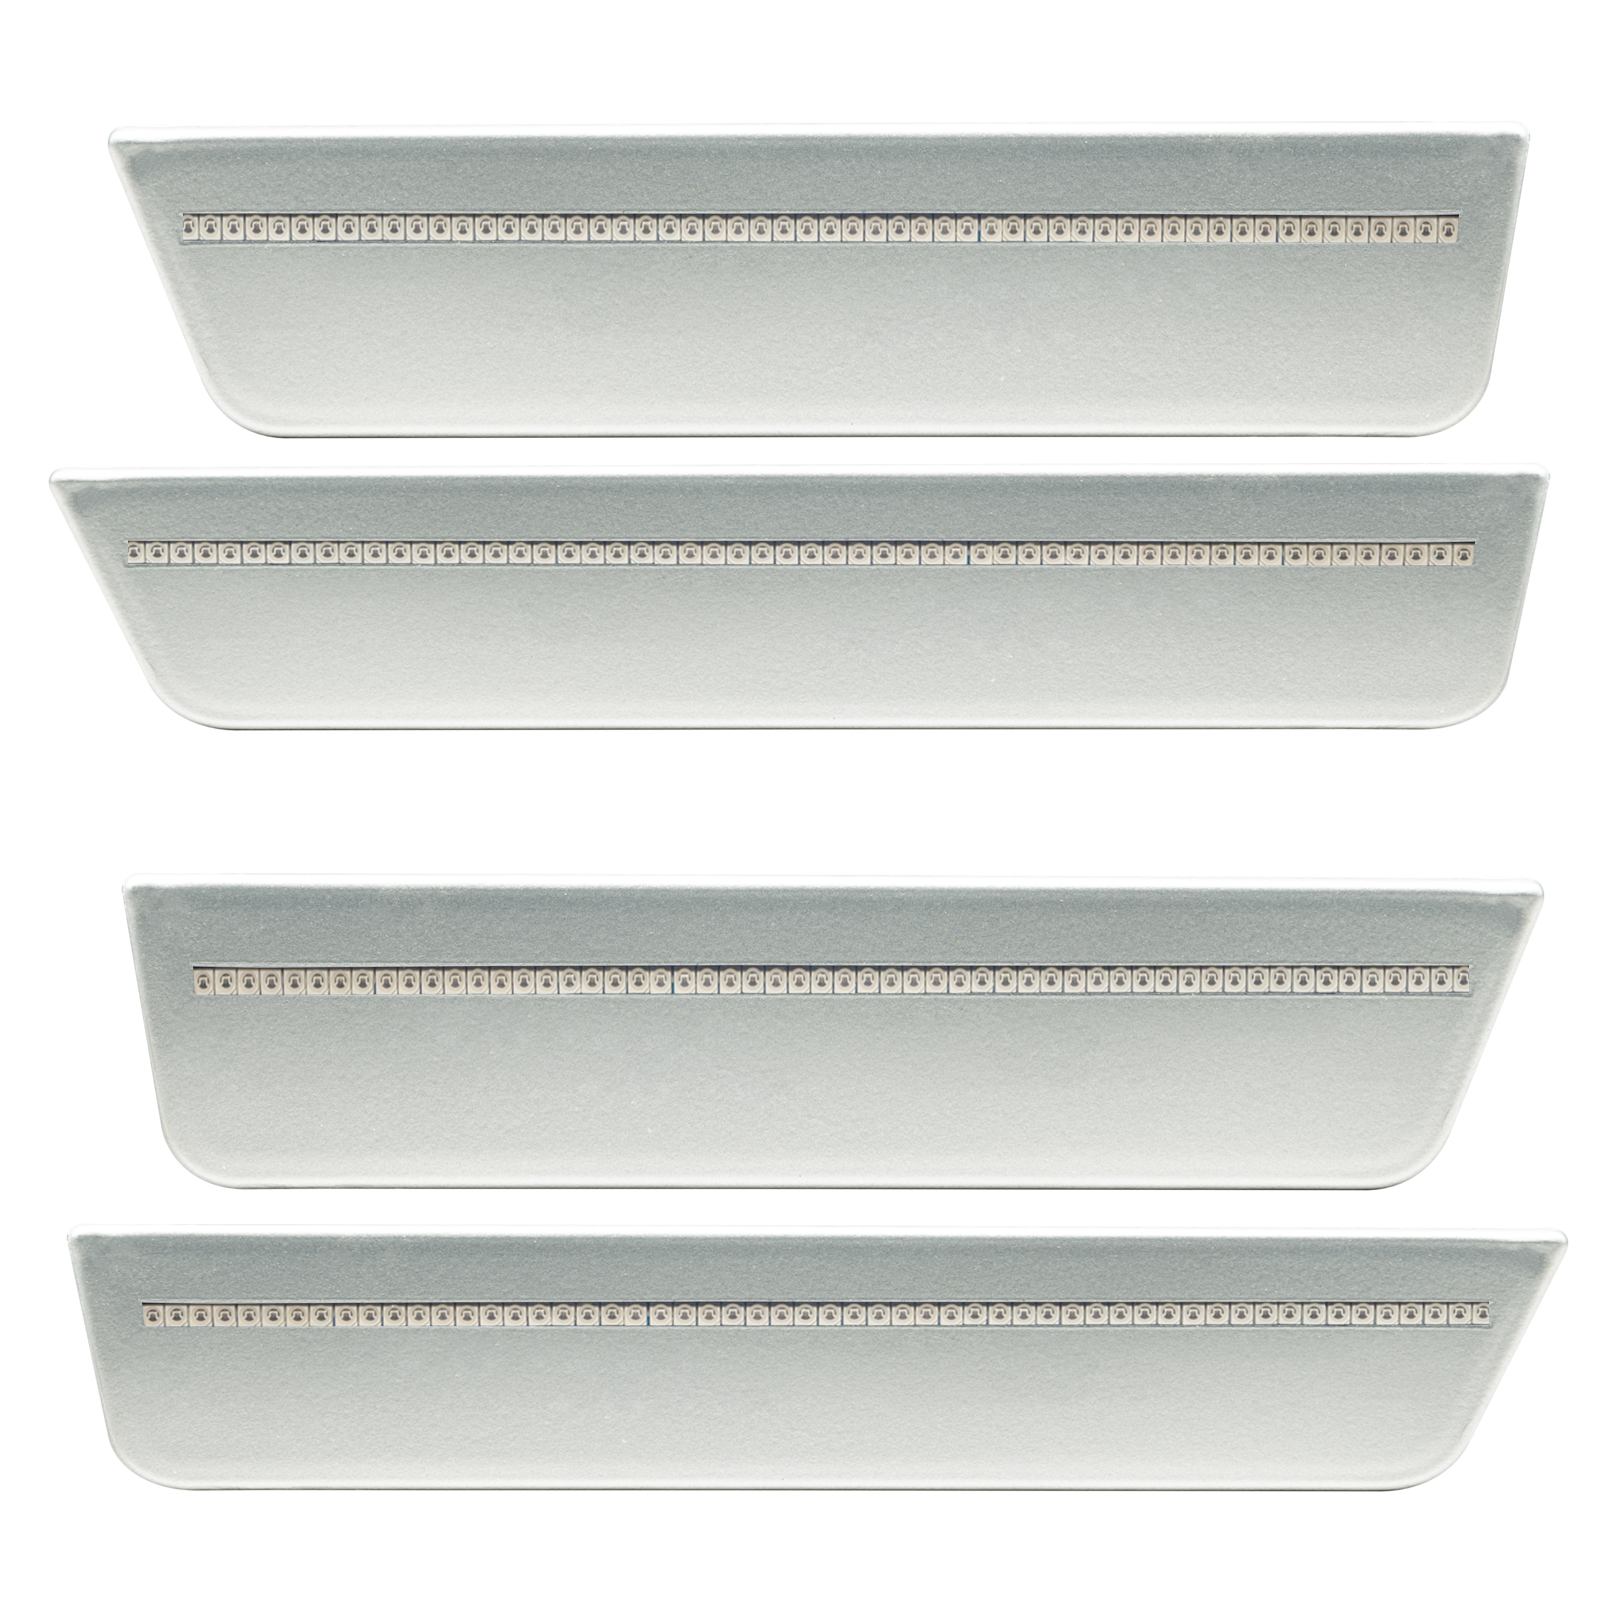 Show details for Oracle Lighting 9800PS2C Concept Sidemarker Set, Clear, Bright Silver Metallic (ps2)